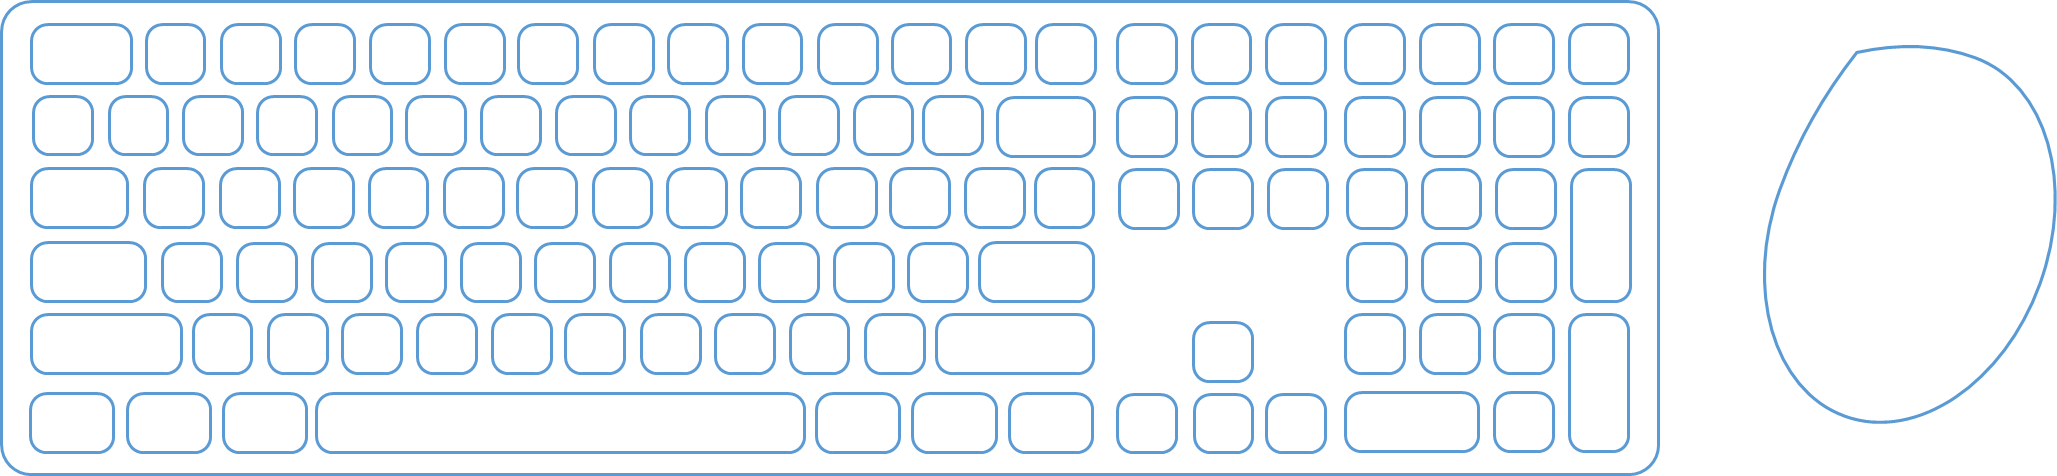 Full sized keyboard with mouse